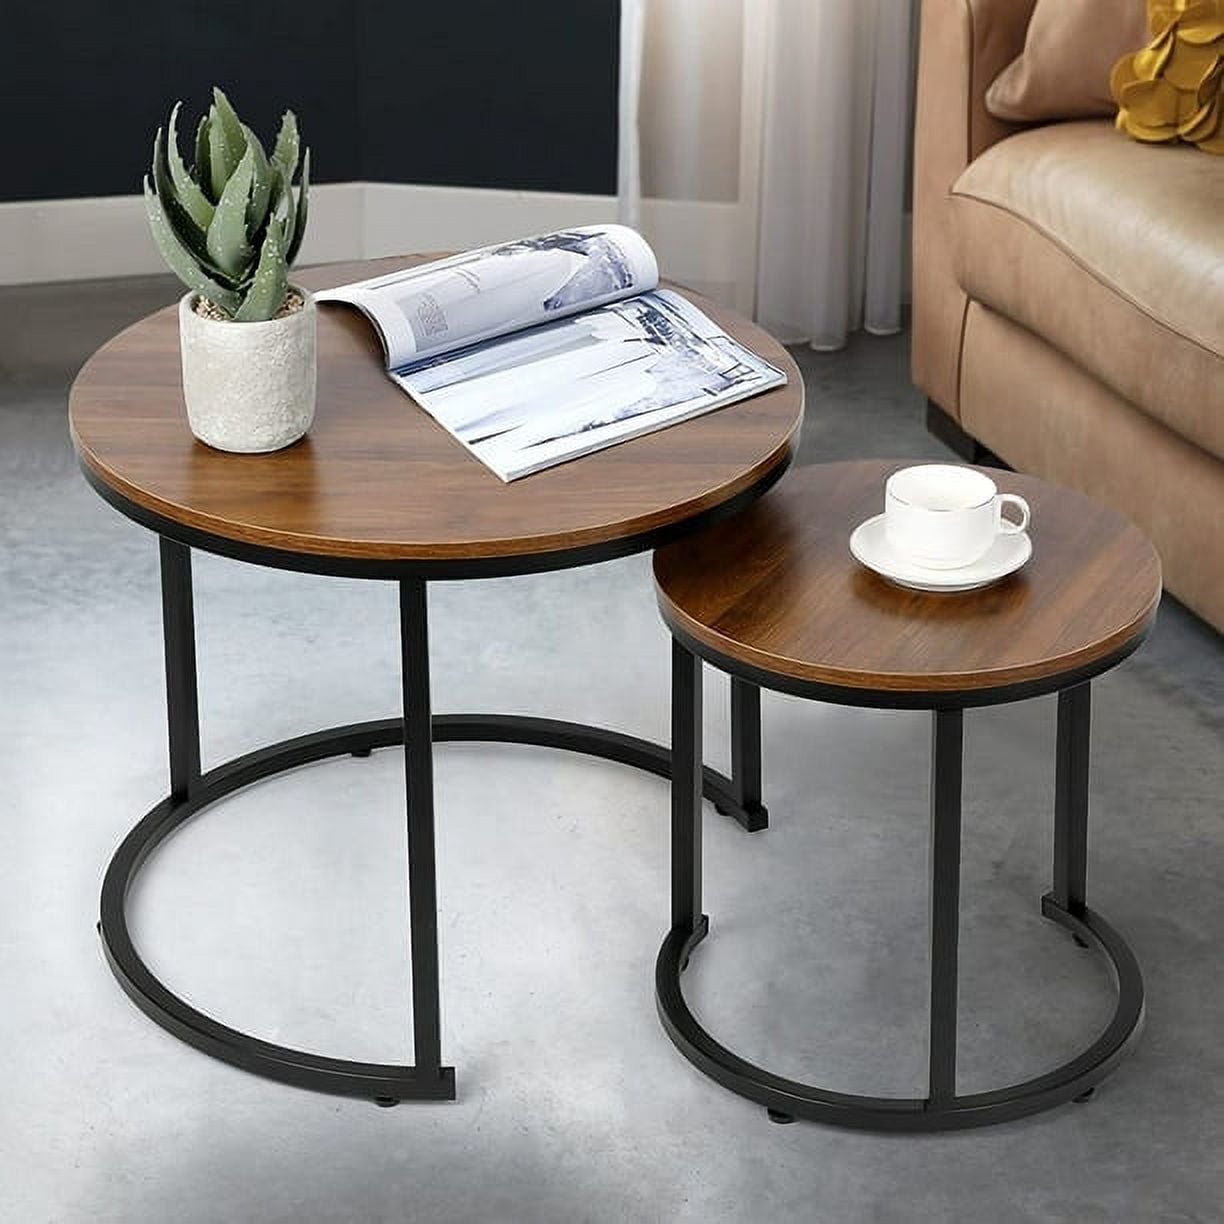 Modern Nest Glass Side Table Living Room Furniture - China Coffee